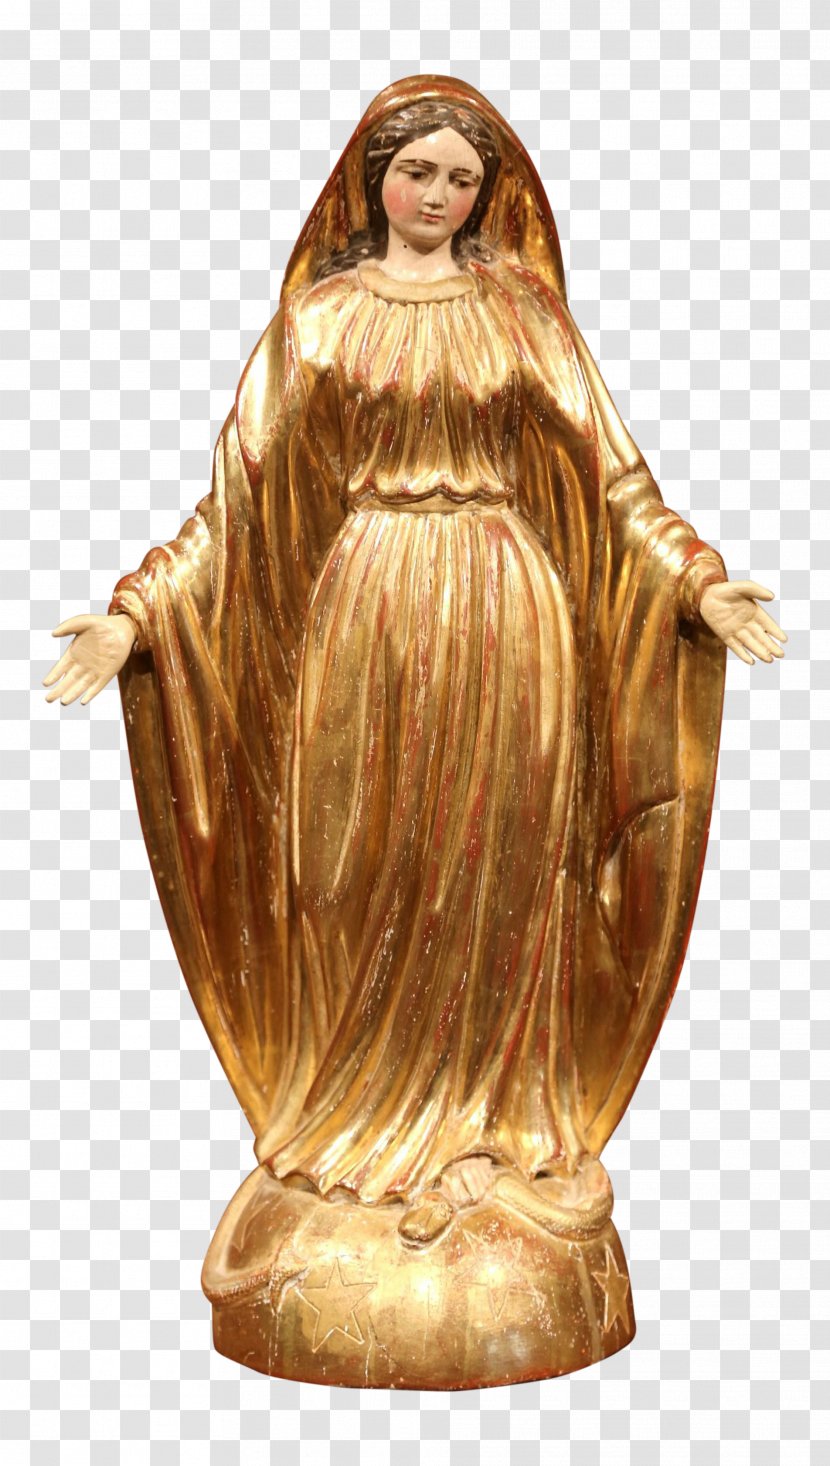 Statue Figurine Bust Sculpture Polychrome - Classical - Virgin Mary Transparent PNG